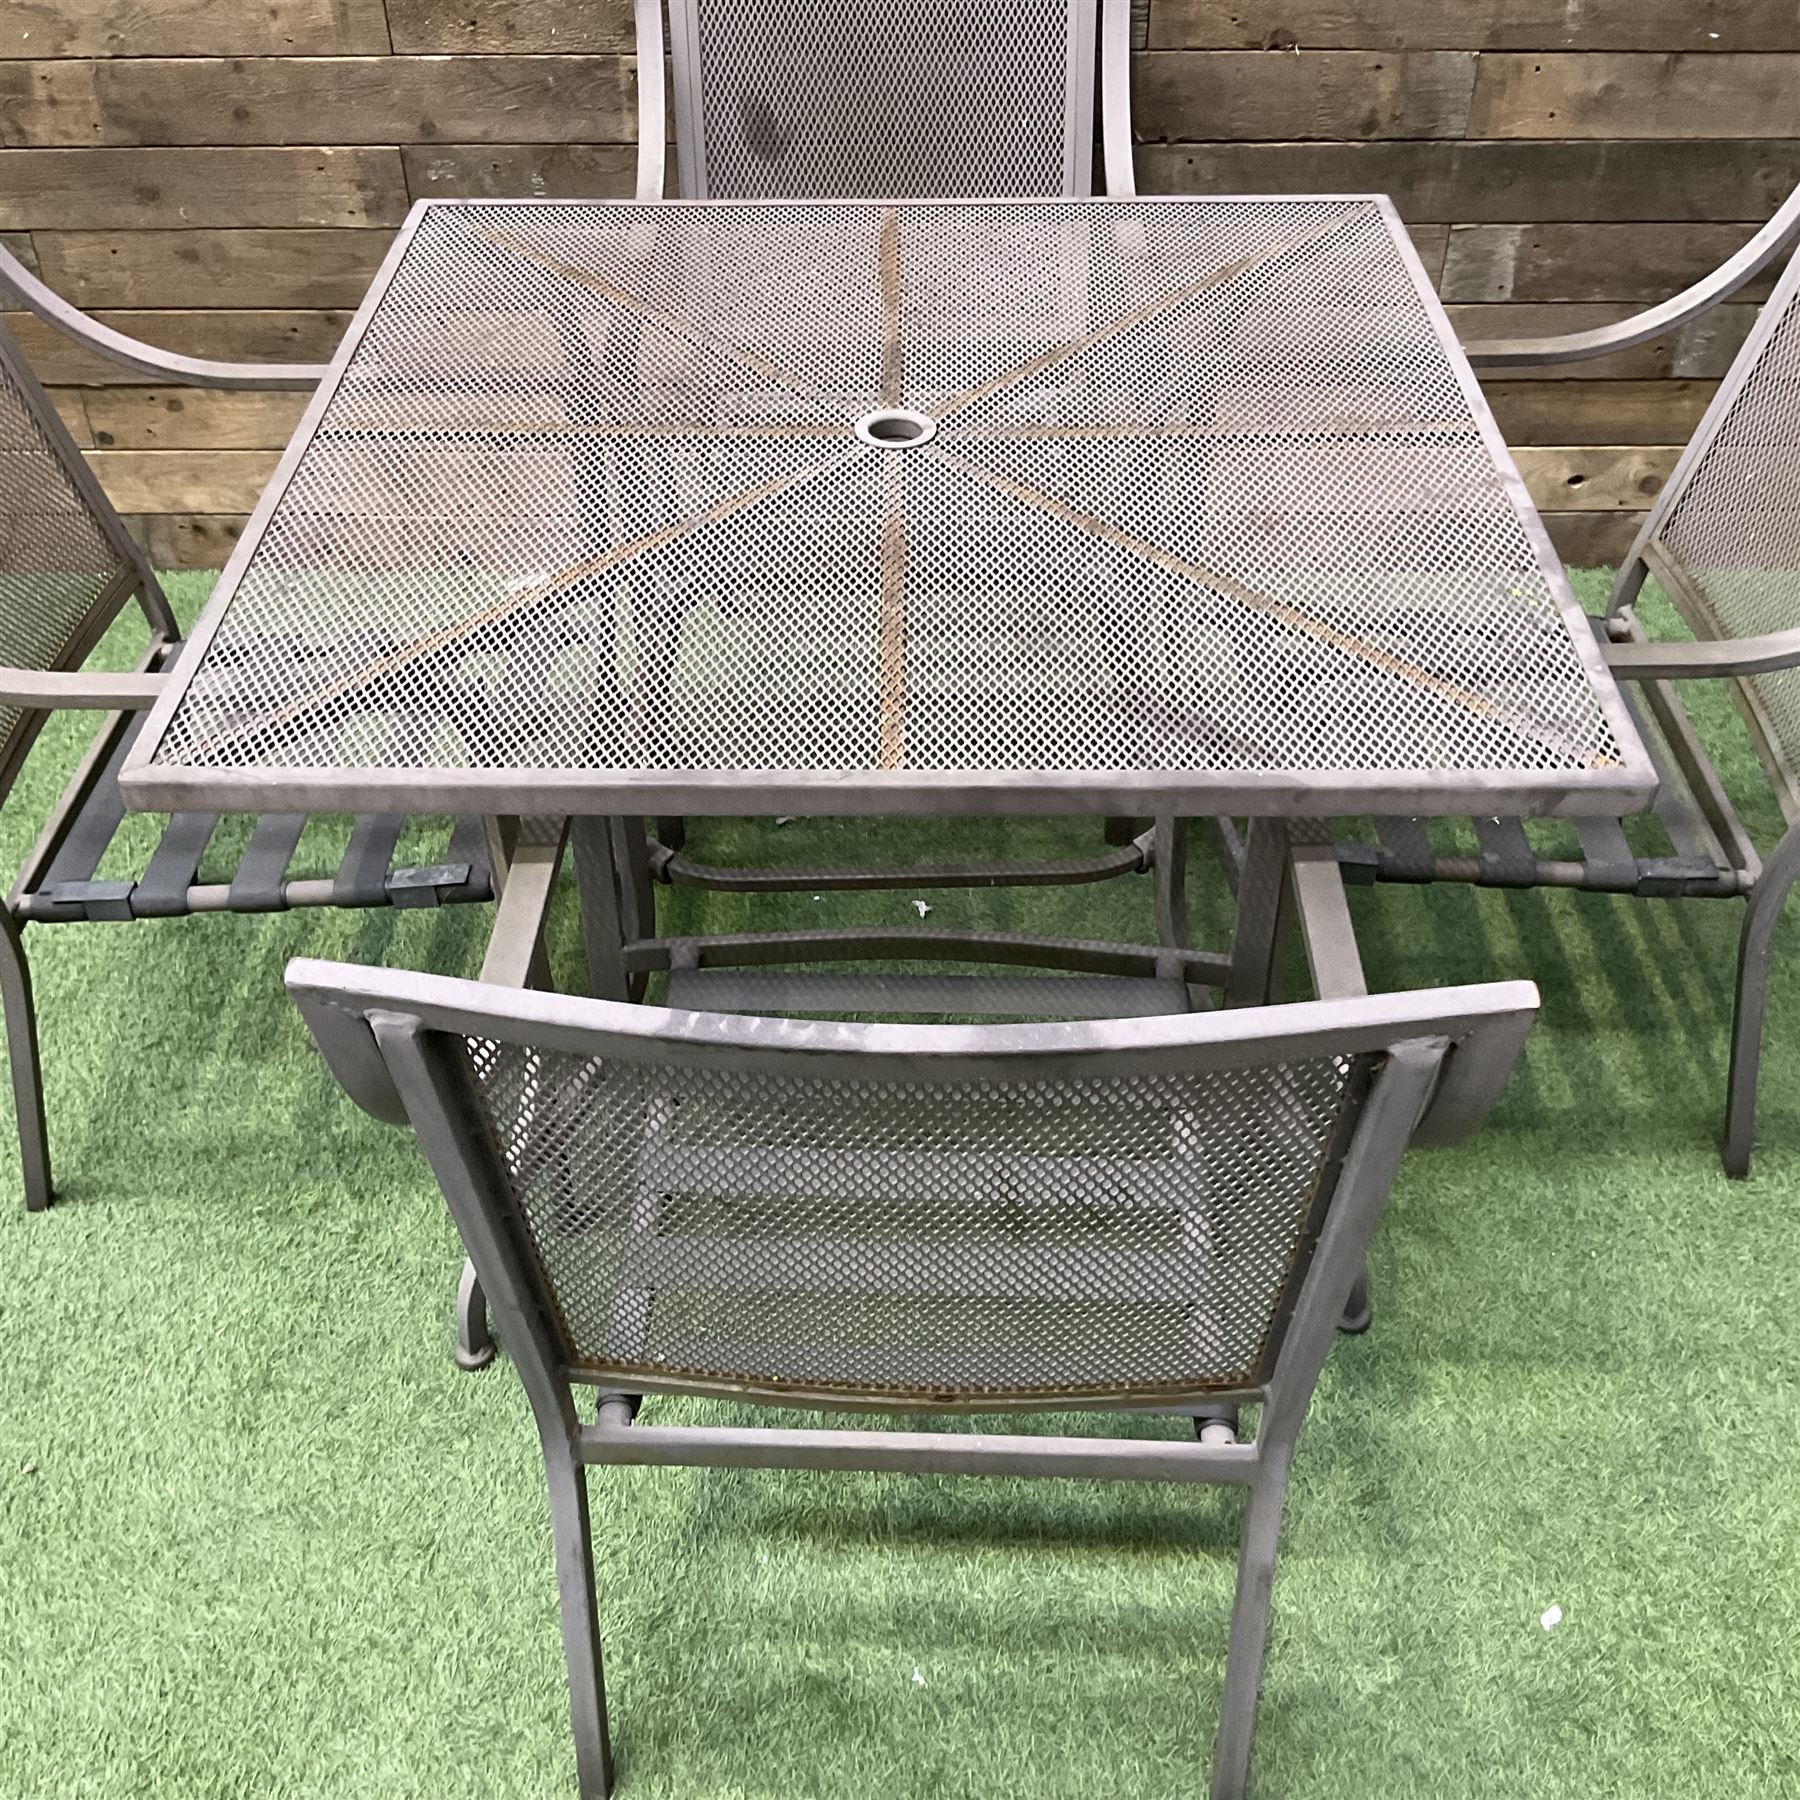 Metal garden table and four chairs - Image 2 of 3